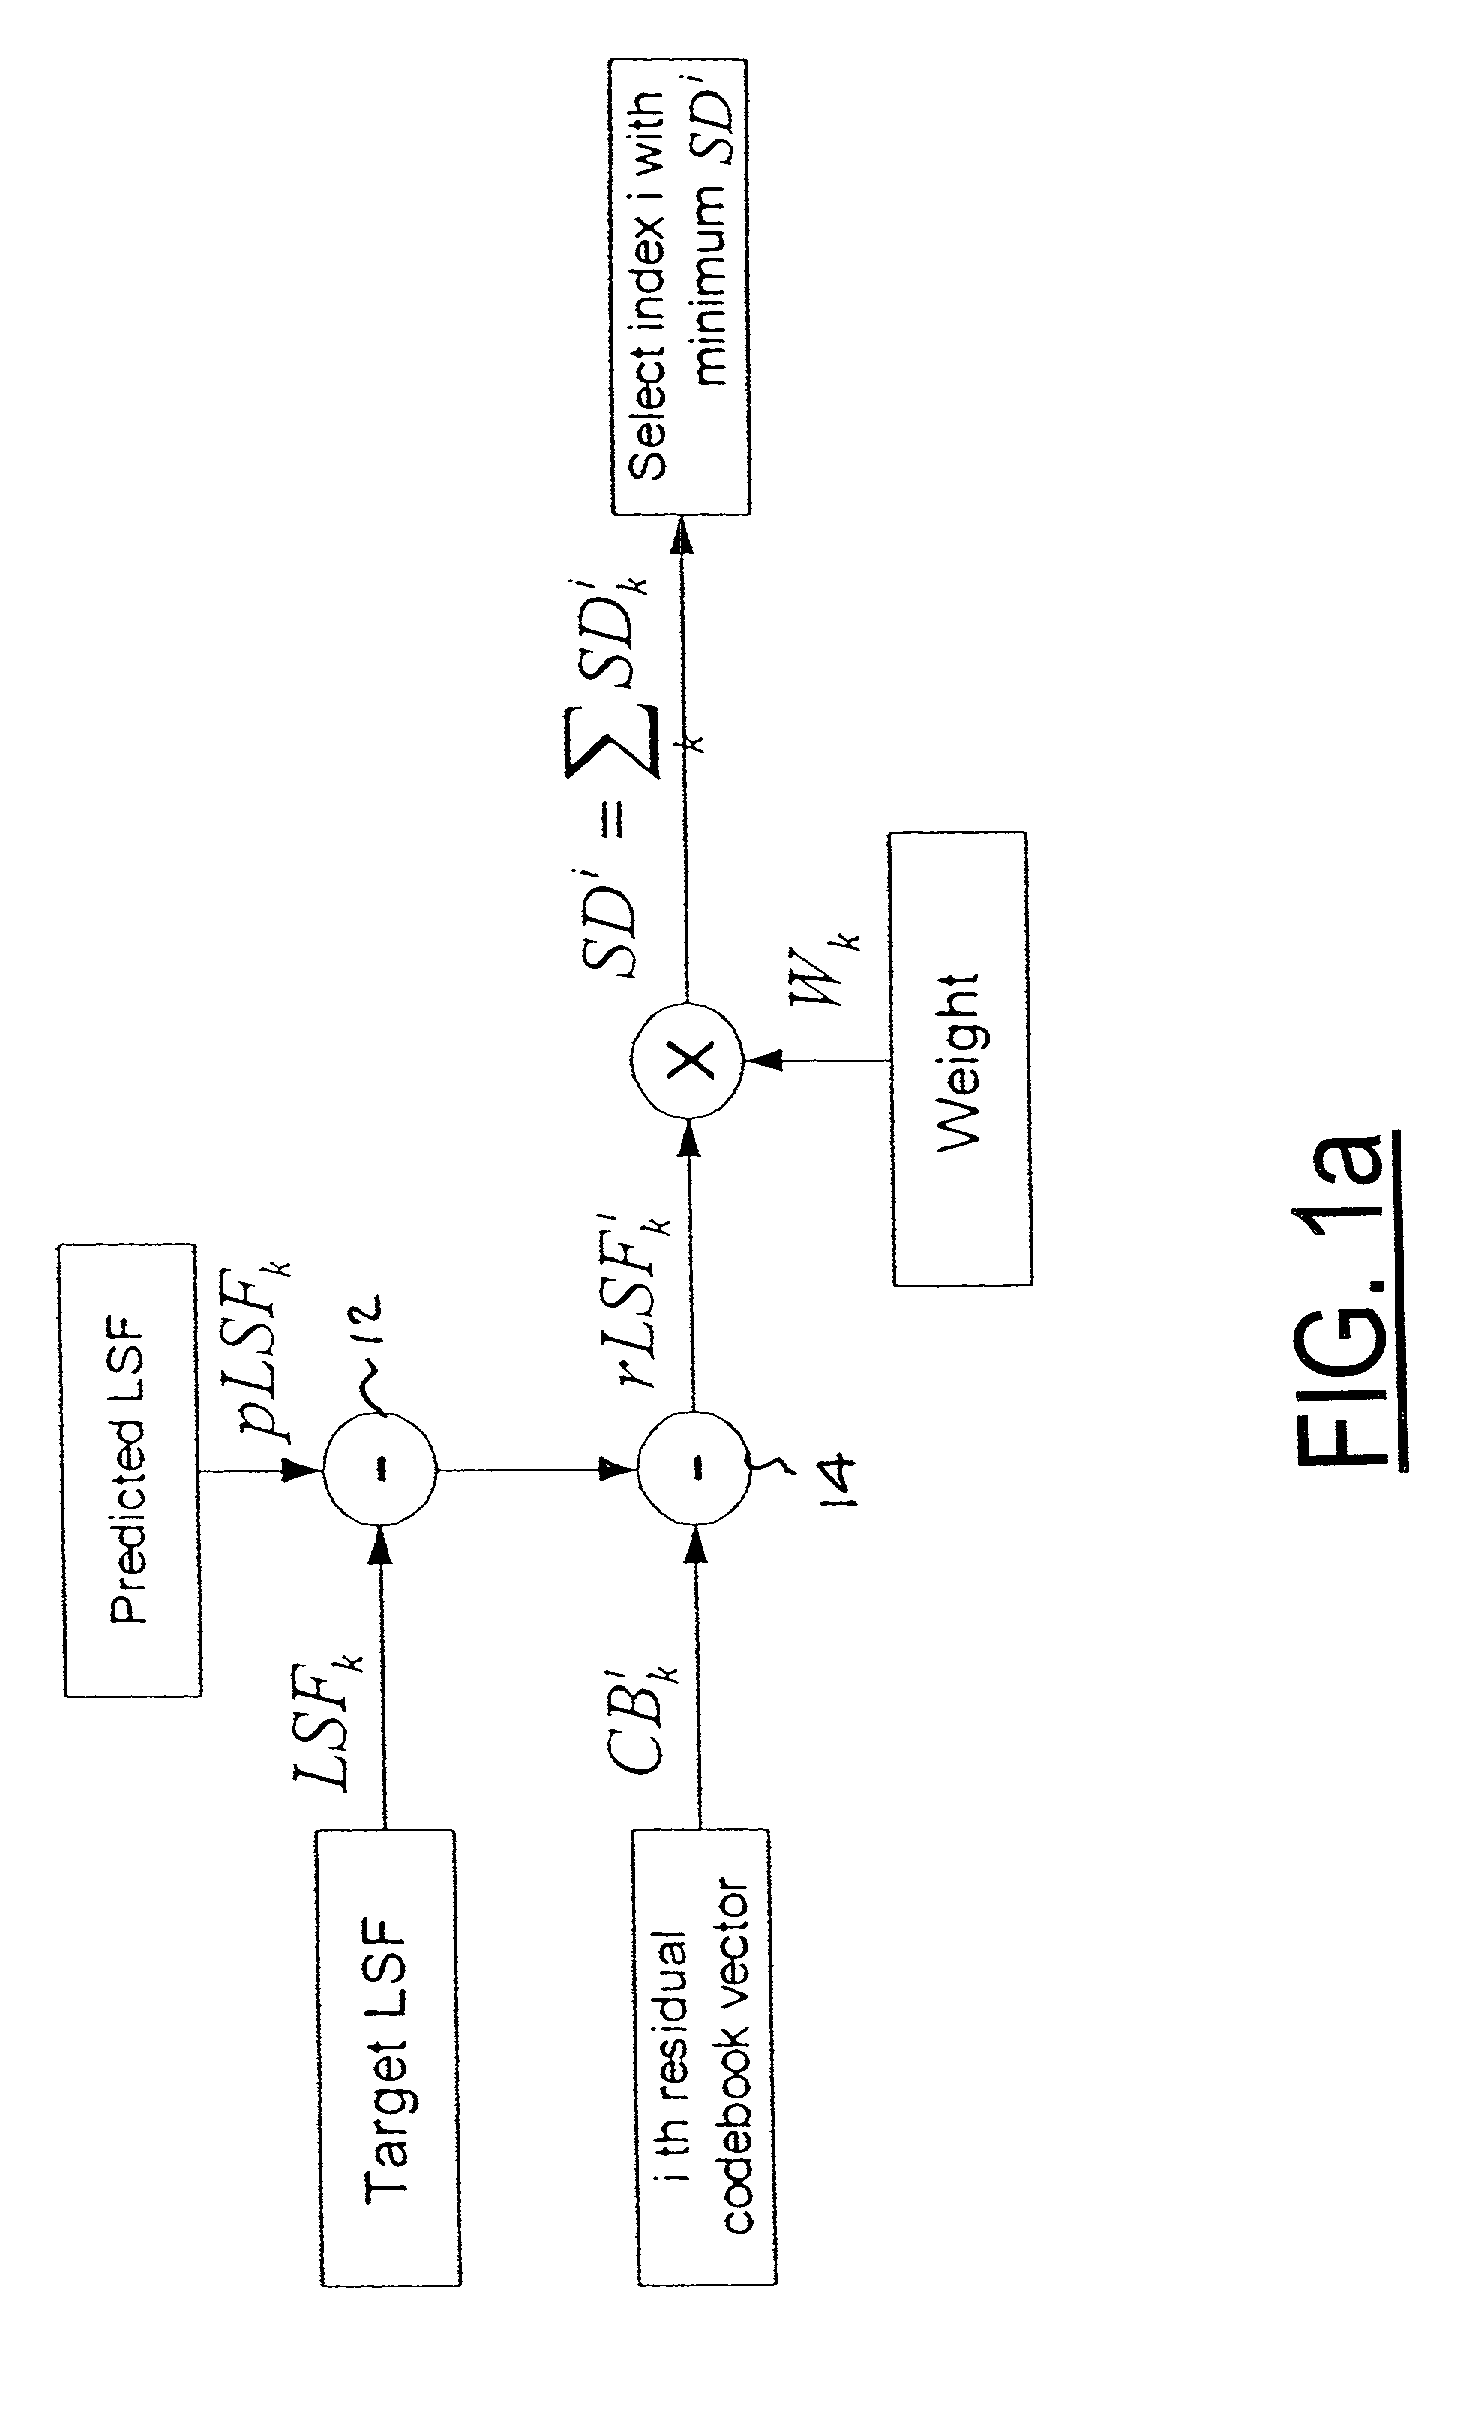 Method and system for line spectral frequency vector quantization in speech codec